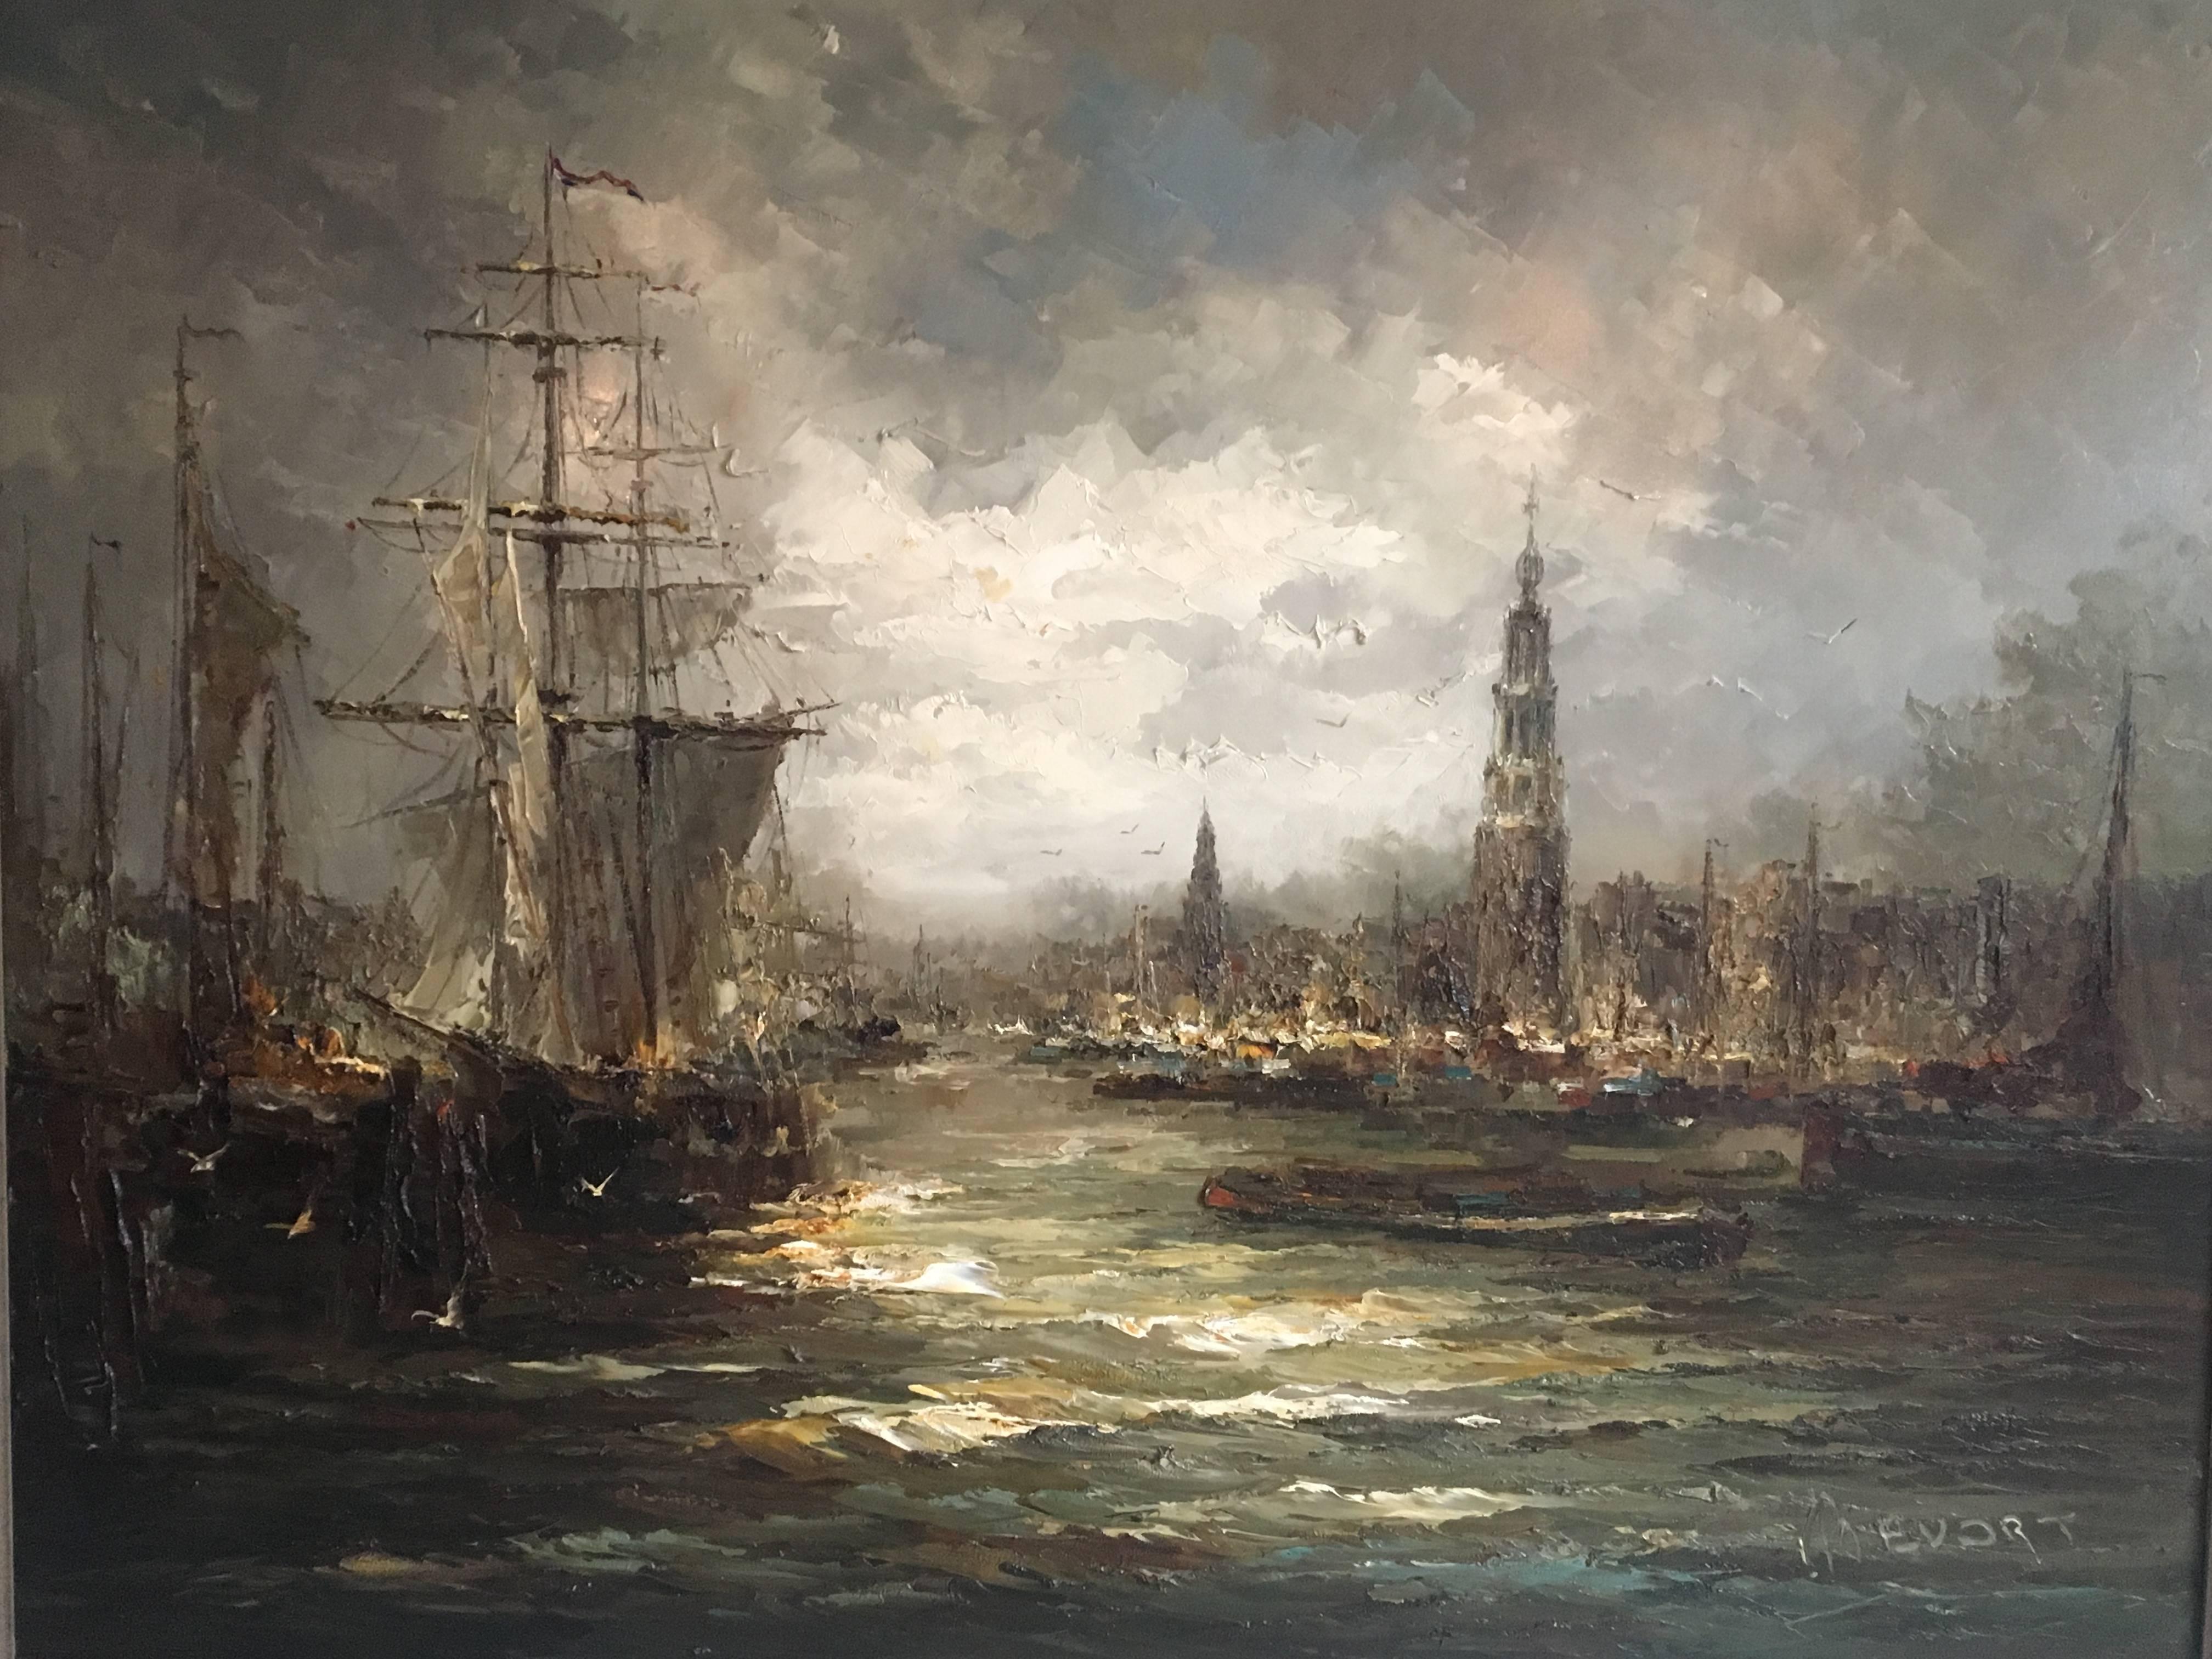 This extra large painting was created by John (Johannes, Hubertus) Be´vort, from the Netherlands. It features a maritime or harbour scene and was painted with dark colors showing a rough weather scene. Seagulls complete it, together with upcoming